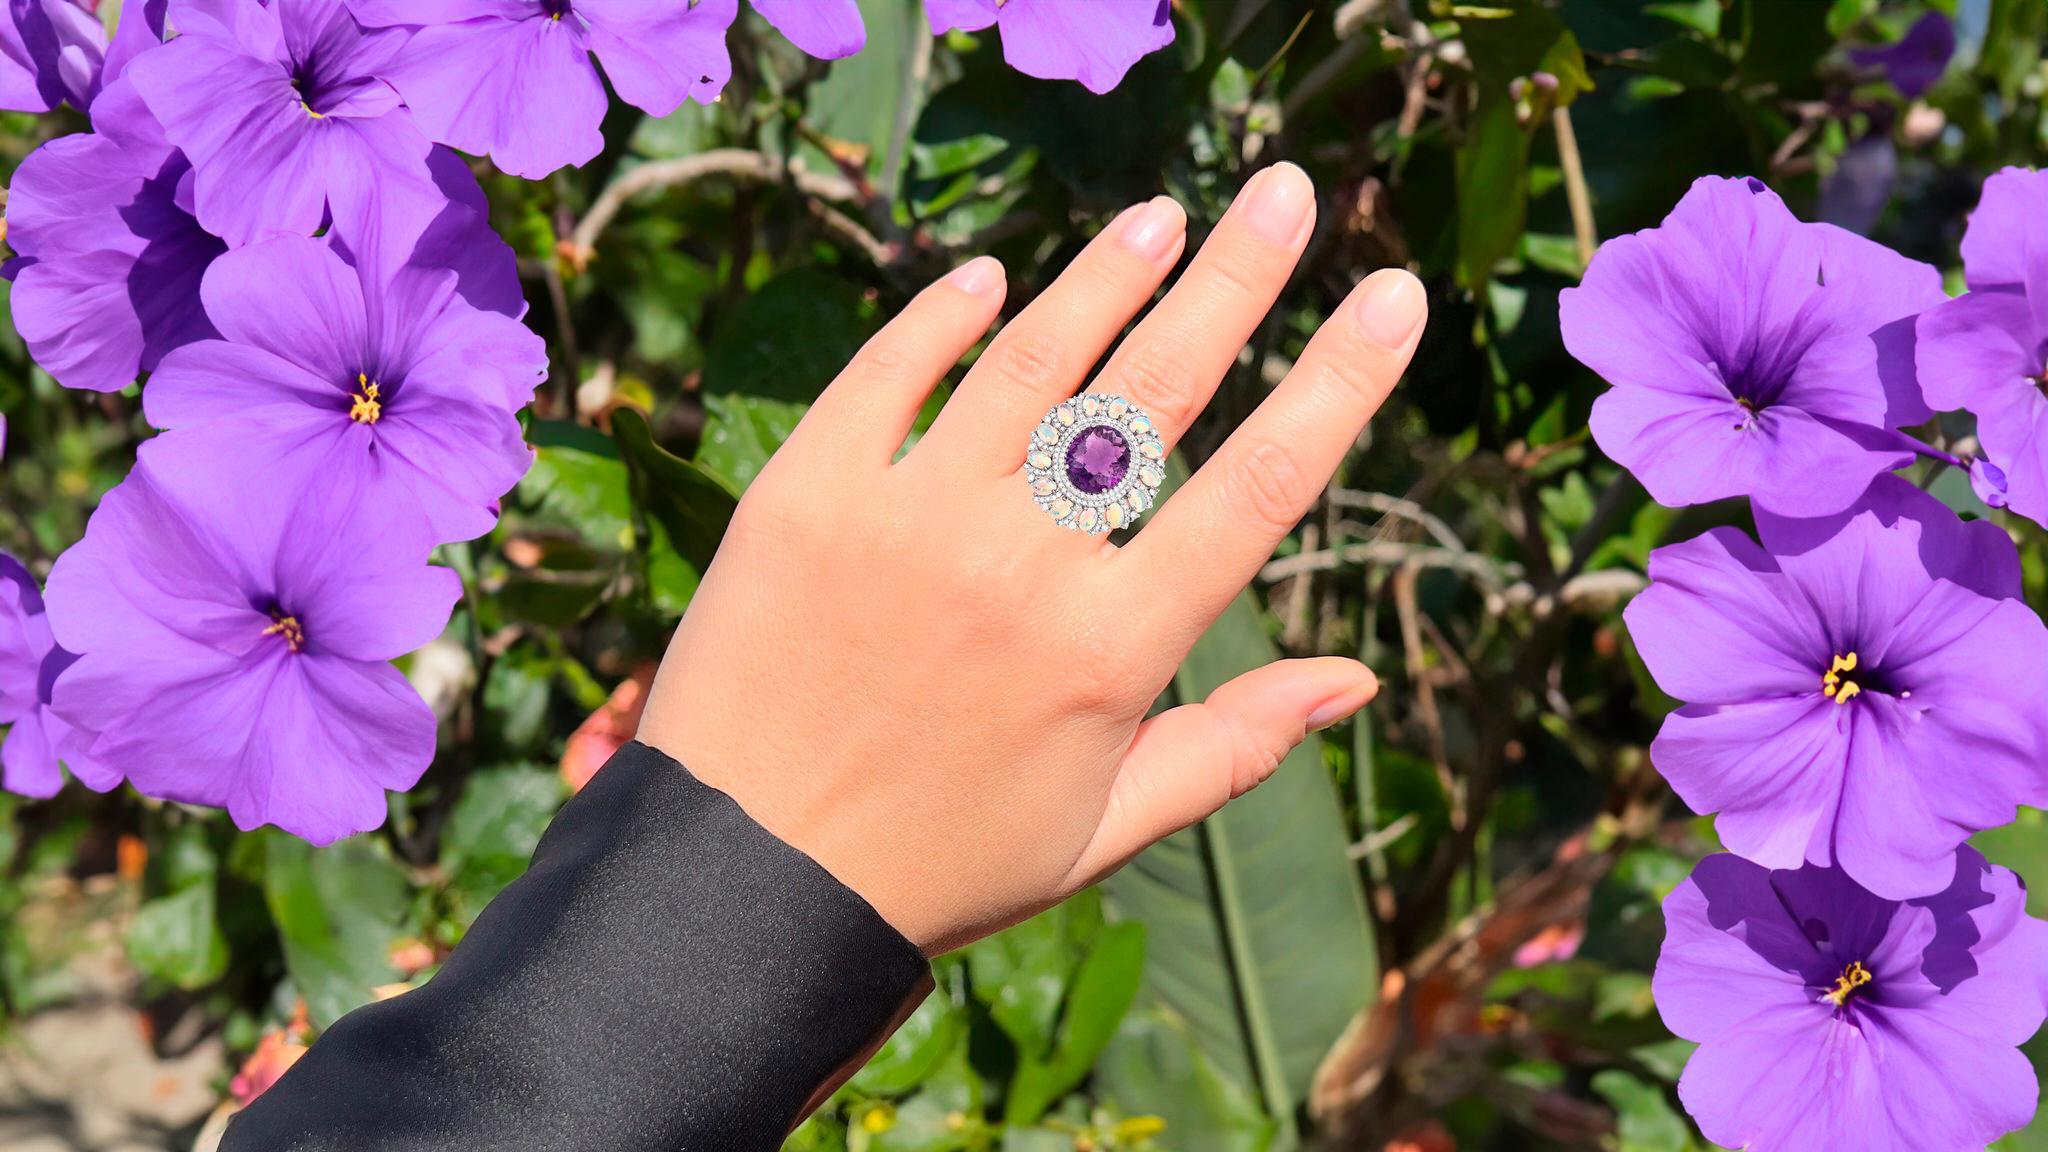 It comes with the Gemological Appraisal by GIA GG/AJP
All Gemstones are Natural
Amethyst = 11.85 Carats
13 Opals = 3.45 Carats
161 Diamonds = 1.95 Carats
Metal: Black Rhodium Plated Sterling Silver
Ring Size: 7* US
*It can be resized complimentary